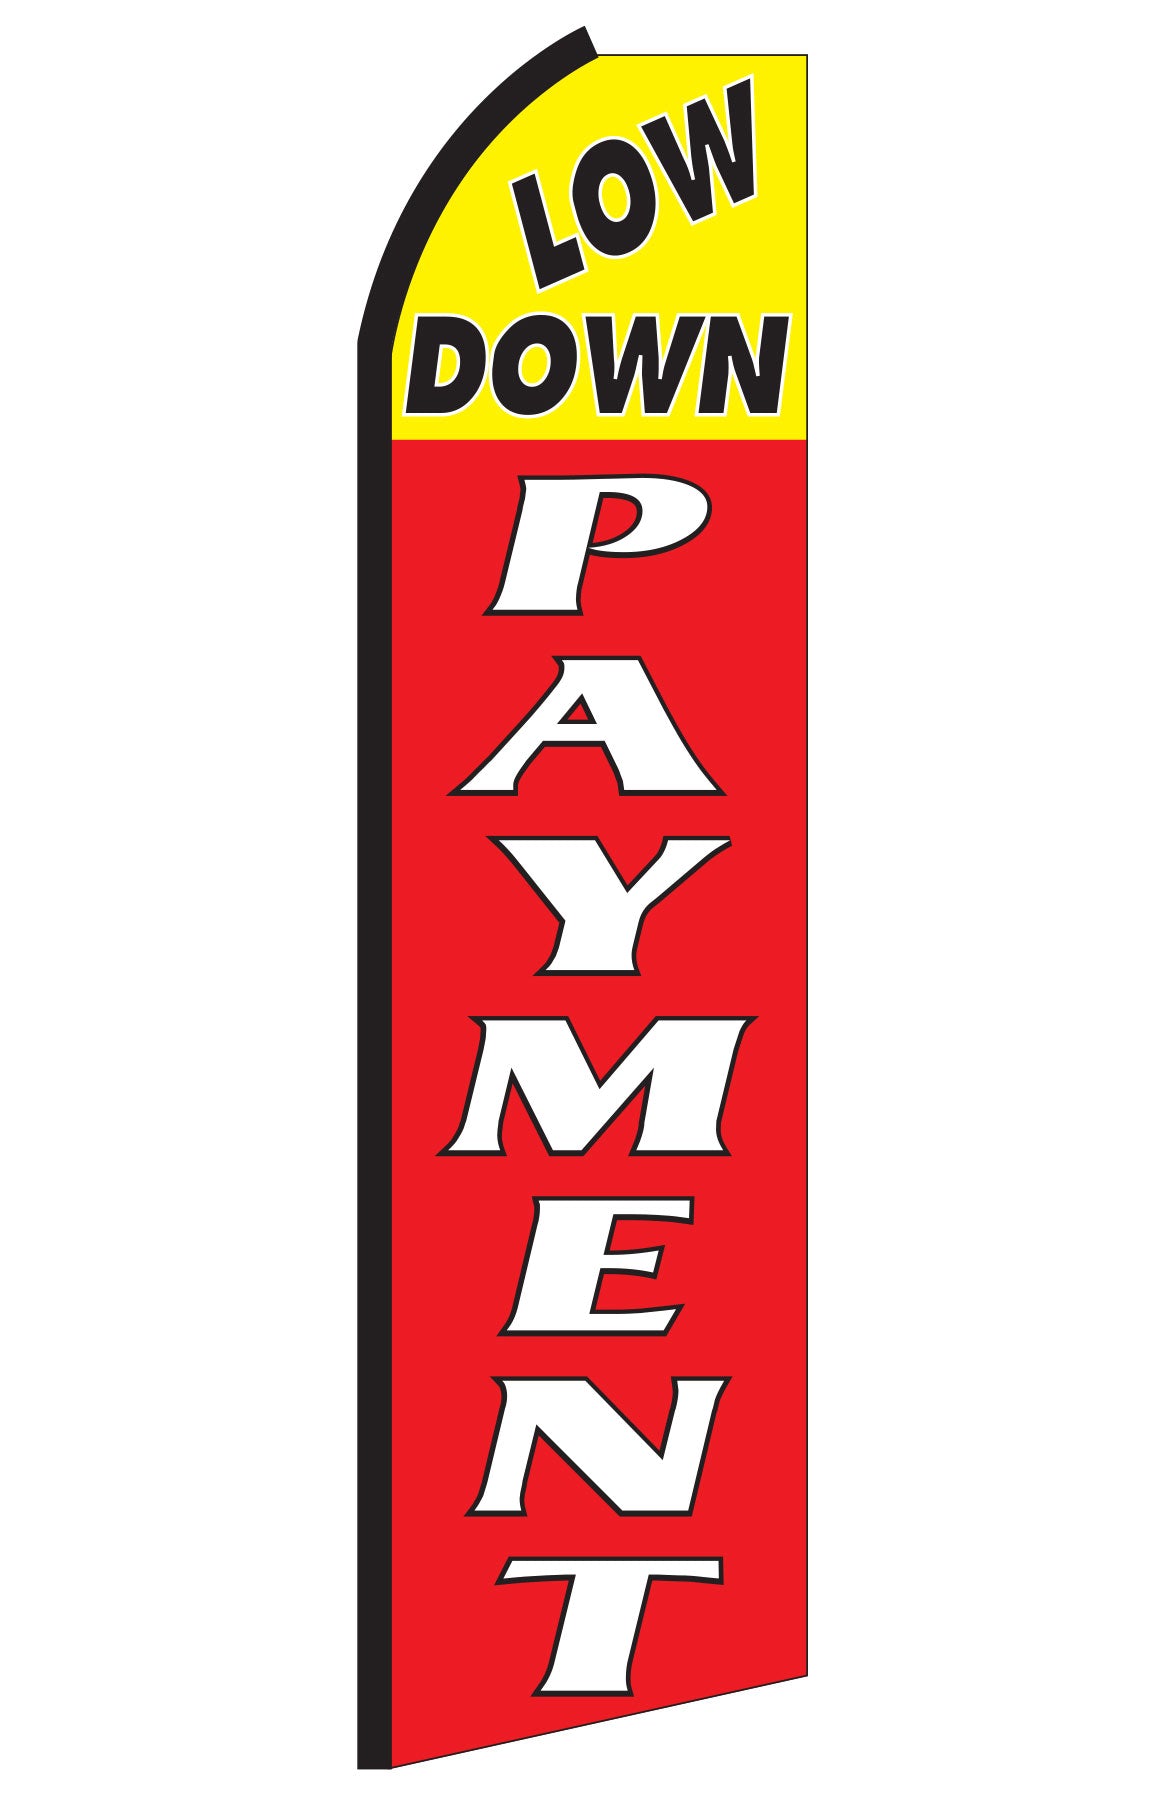 Low Down Payment